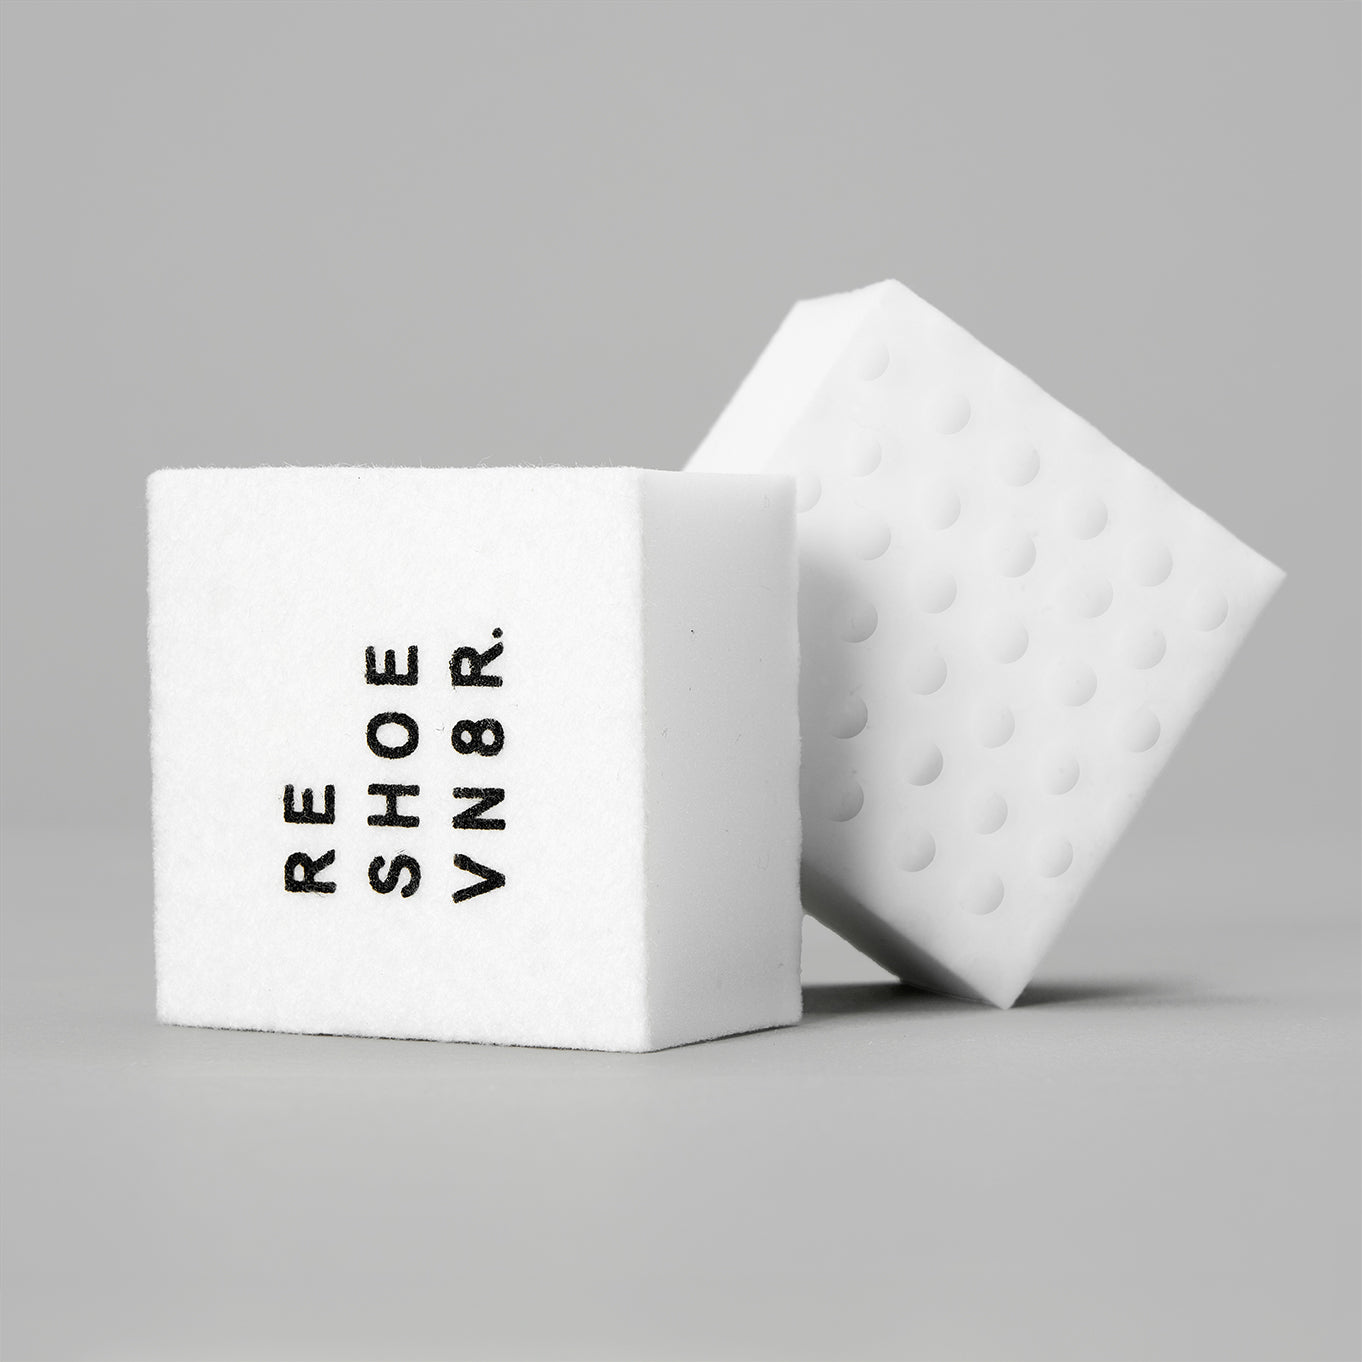 Two white sponges stacked on top of each other on a gray surface. There is text on the sponges that says "RESHOEVN8R". One sponge has soft side and one sponge has bumpy side.